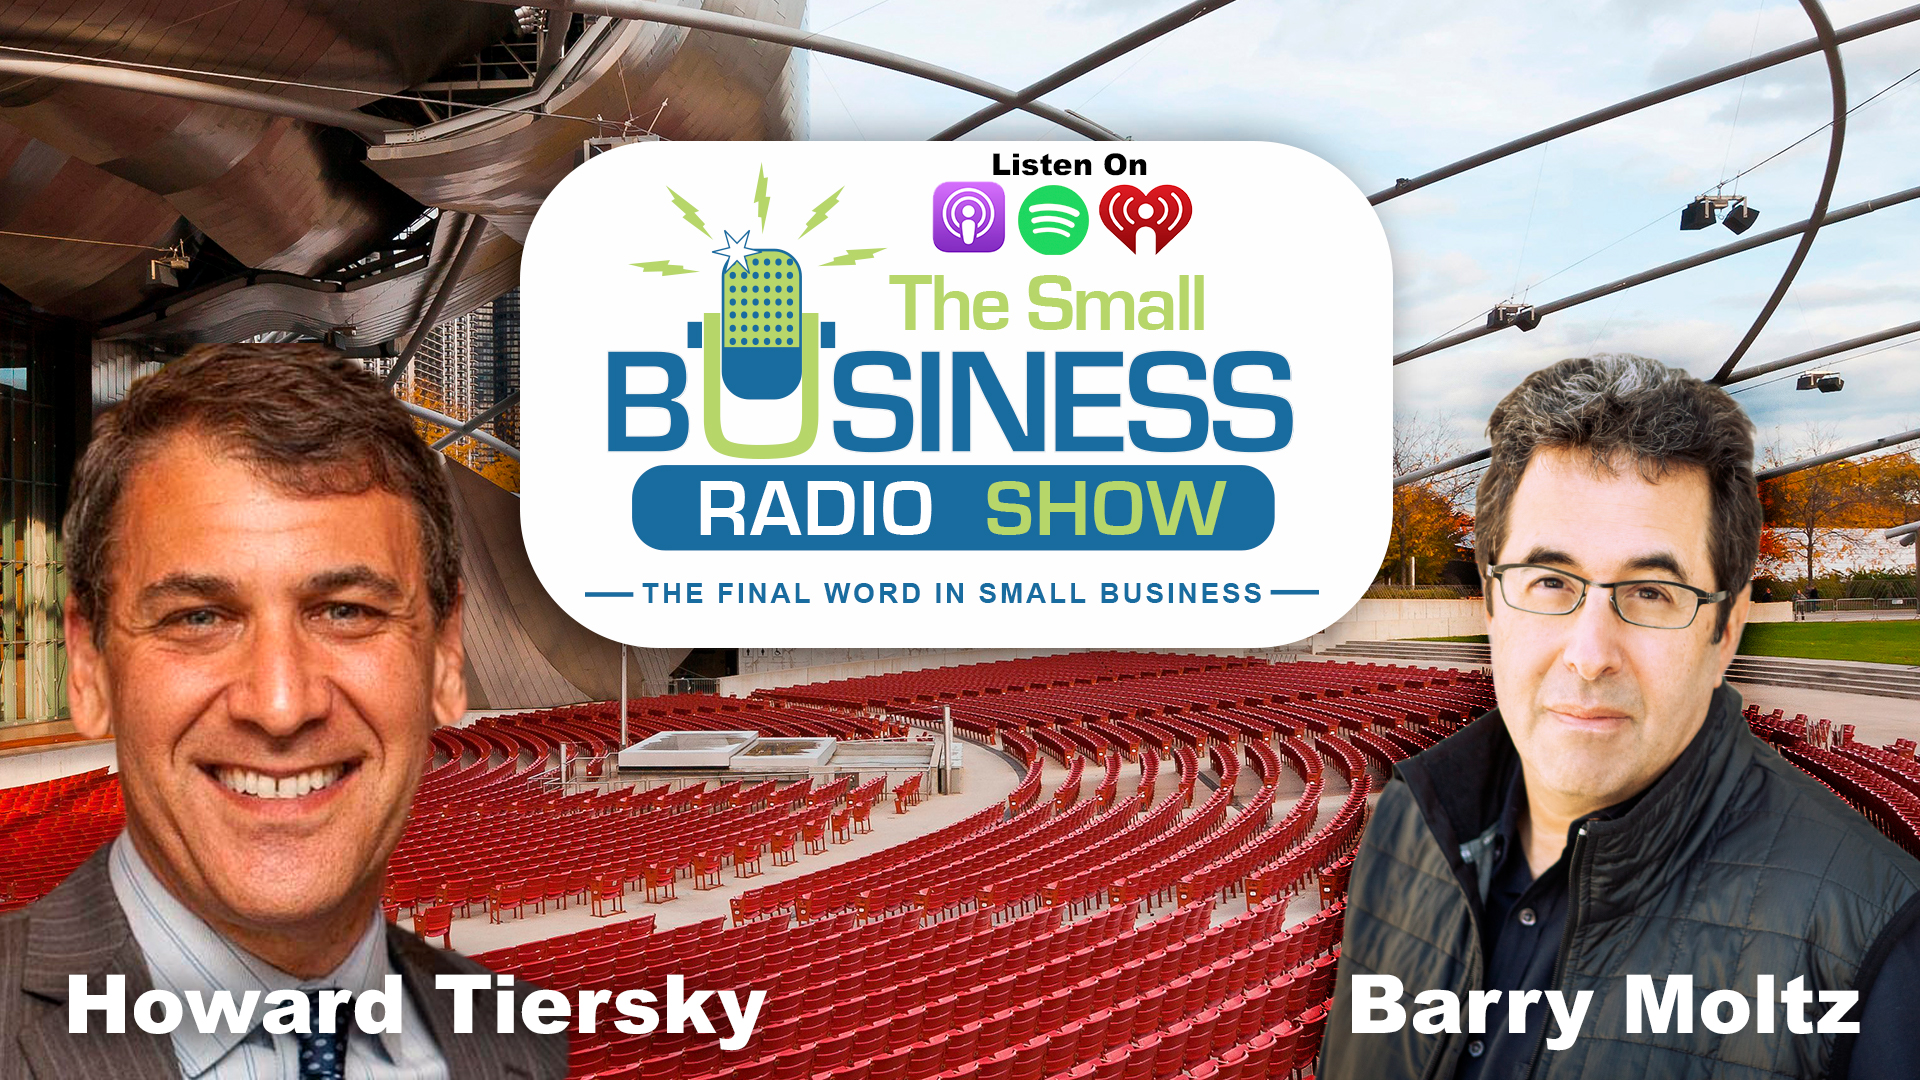 Howard Tiersky on The Small Business Radio Show